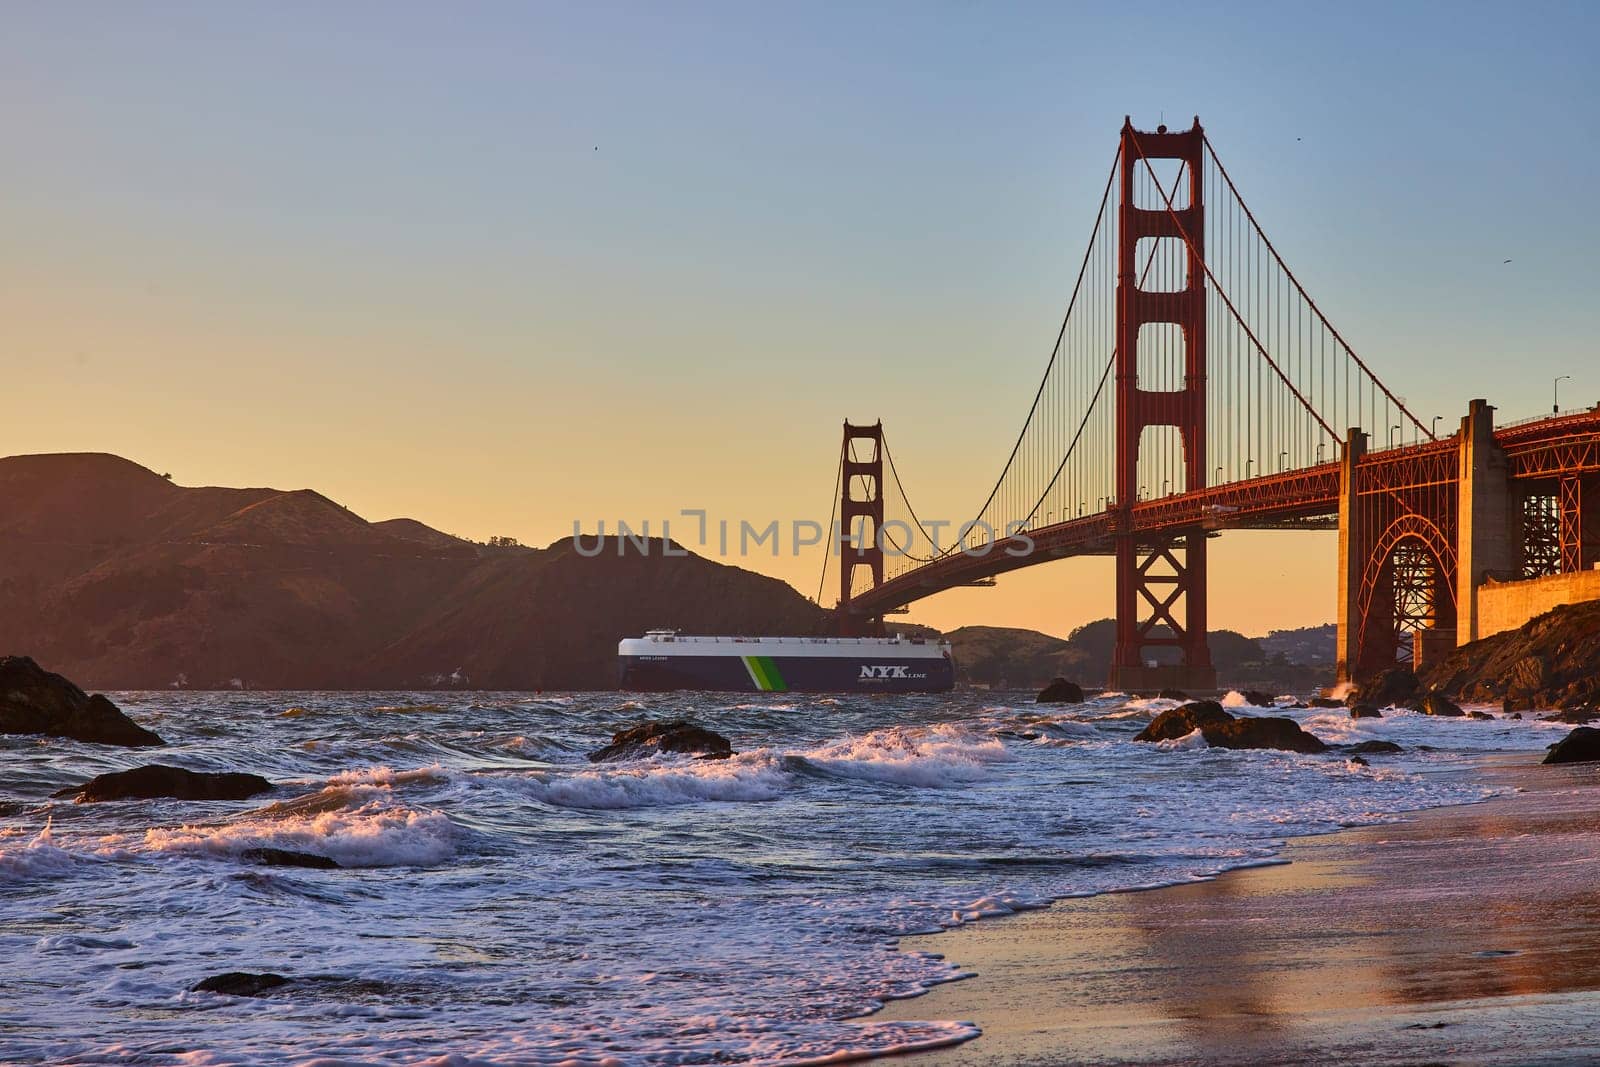 Image of Ocean liner going under Golden Gate Bridge at sunset from sandy beach with waves